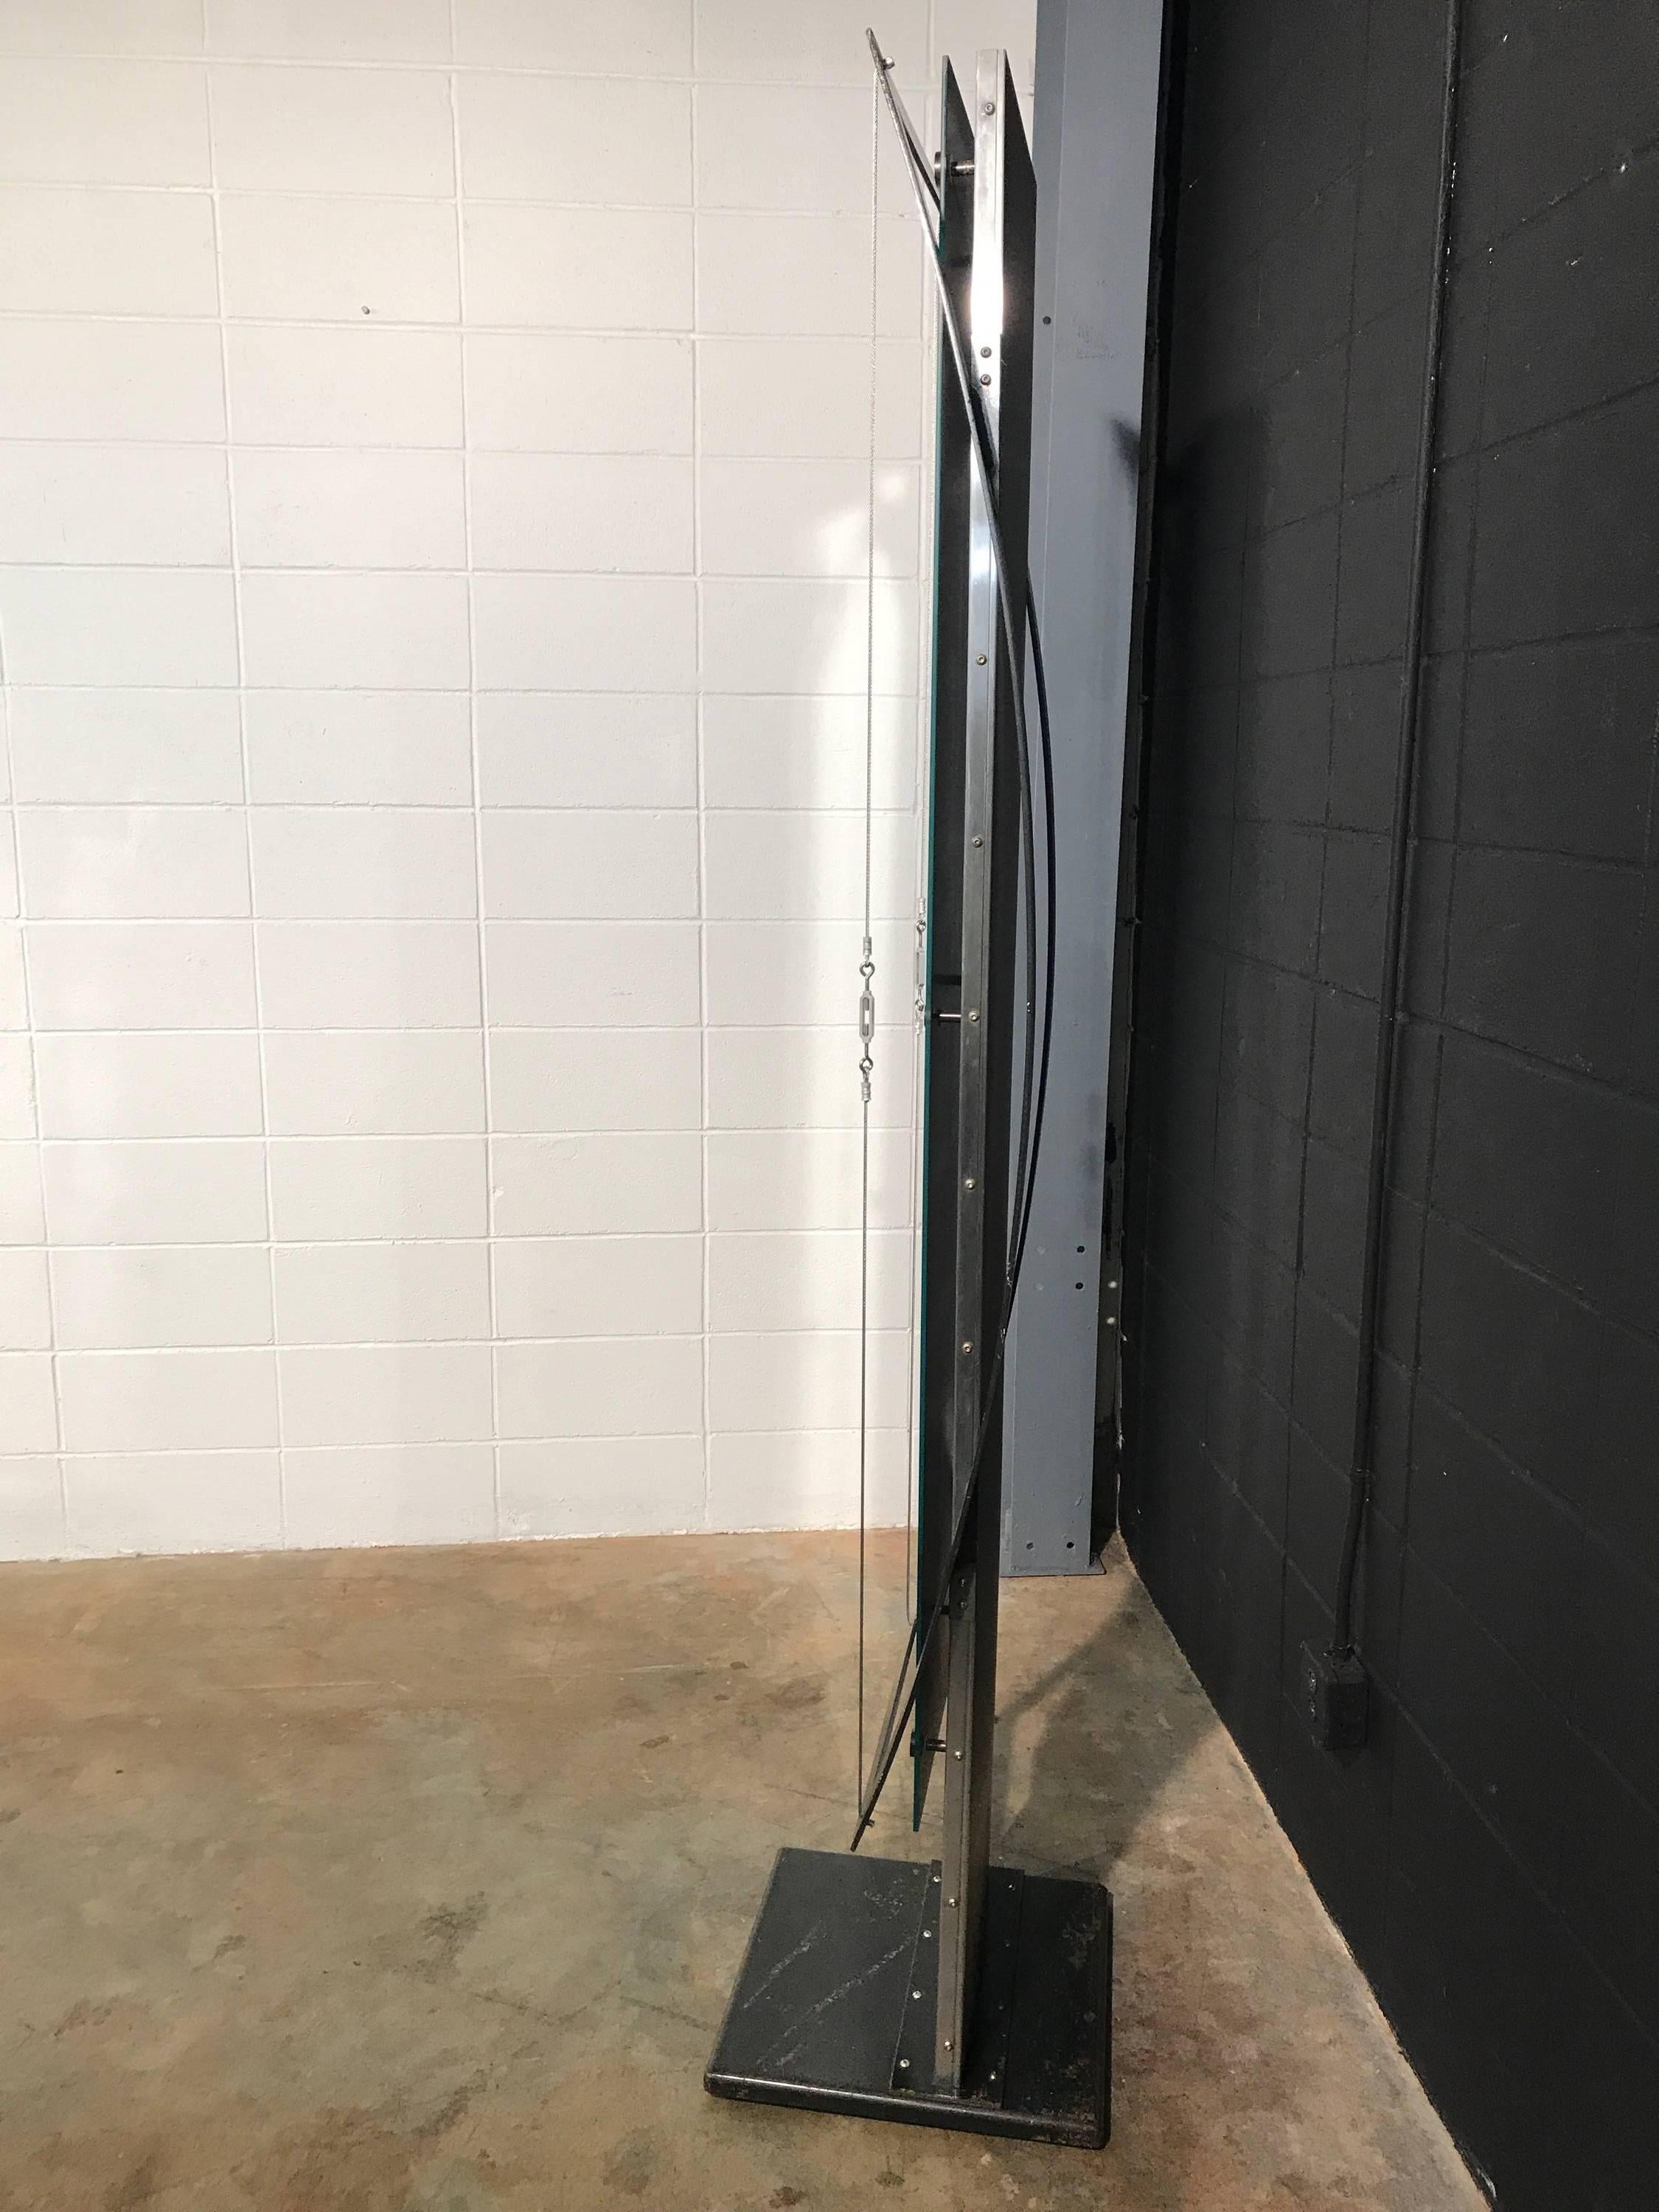 Custom curved Industrial style steel mirror. Unique mirror custom made from steel flat plate and cables. This mirror is a large statement piece and would be great for an Industrial style space, a Mid Century Modern home, or even a retail